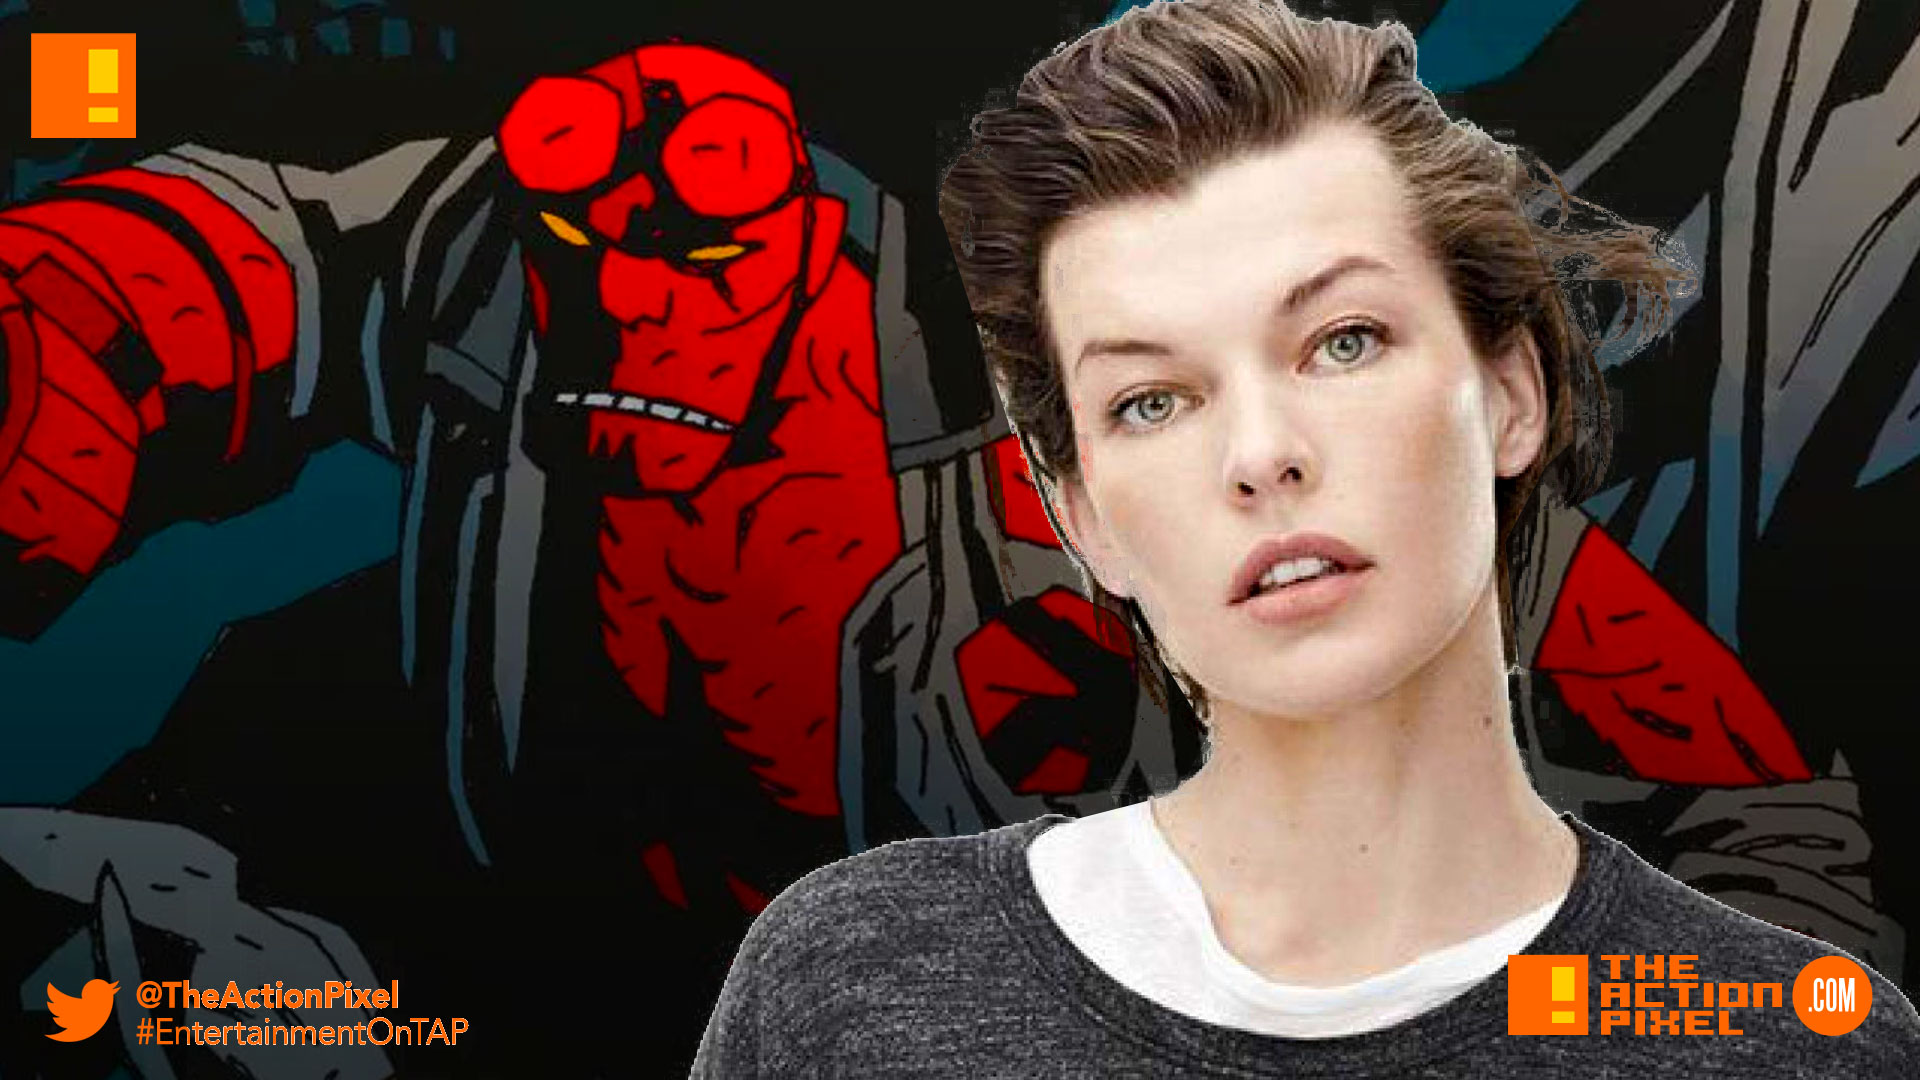 milla jovovich, blood queen, hellboy and the blood queen, entertainment on tap, the action pixel,